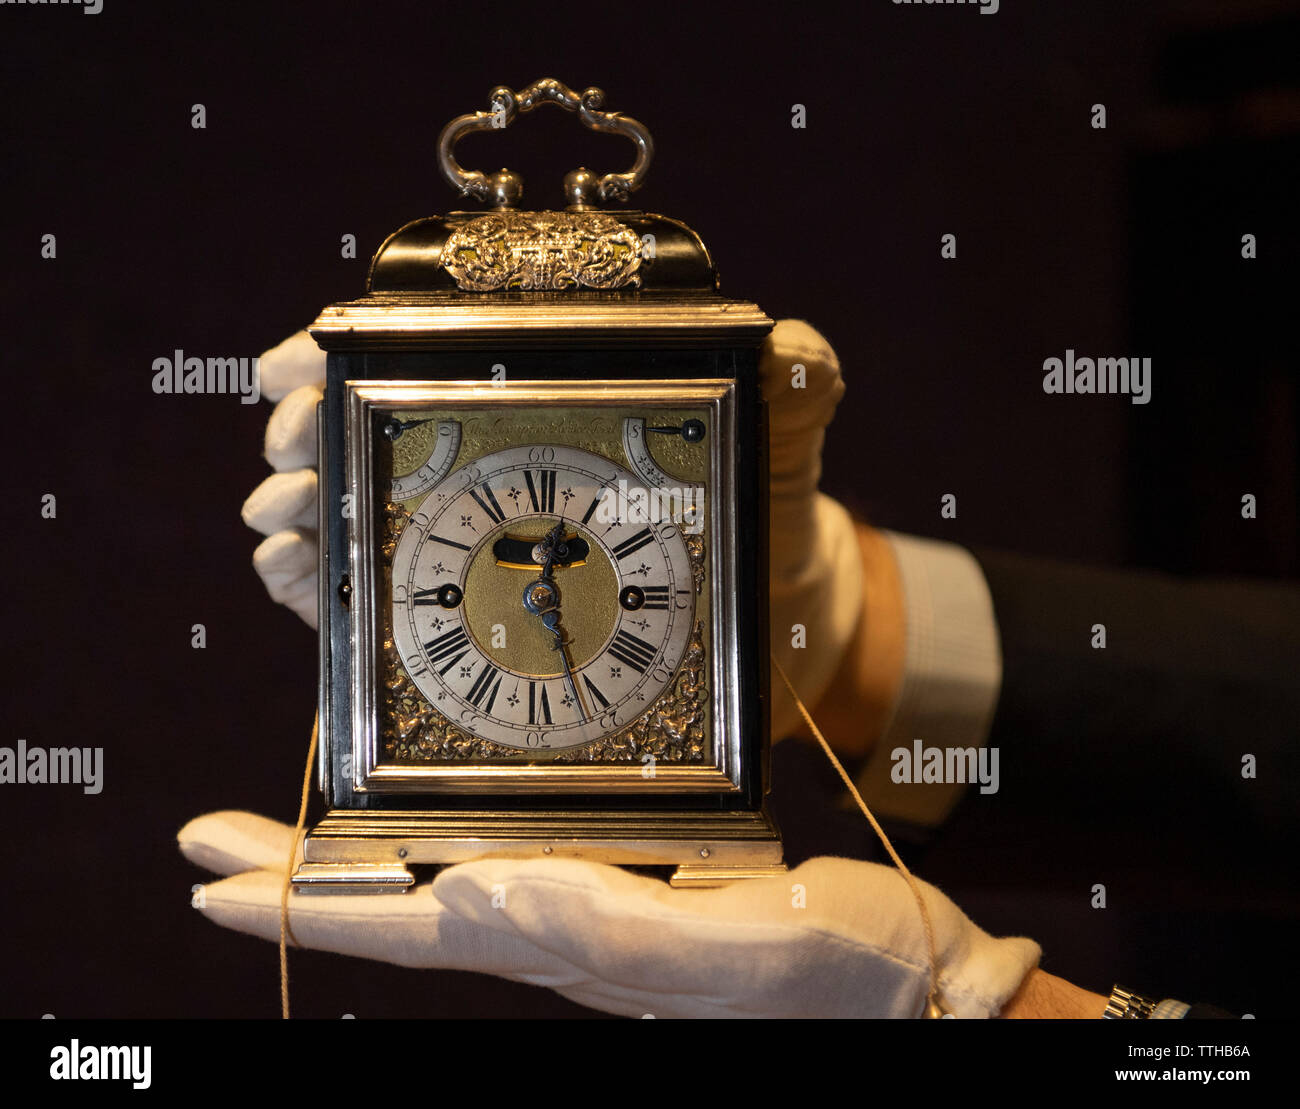 Bonhams, London, UK. 17th June 2019. Bonhams The Clive Collection of Fine Clocks and Watches preview of sale on 19th June 2019. One of the most valuable clocks ever to appear at auction, The King William and Queen Mary Royal Tompion table clock made by Thomas Tompion for Queen Mary II in 1693 (the Q Clock) is expected to fetch in excess of £2m. Credit: Malcolm Park/Alamy Live News. Stock Photo